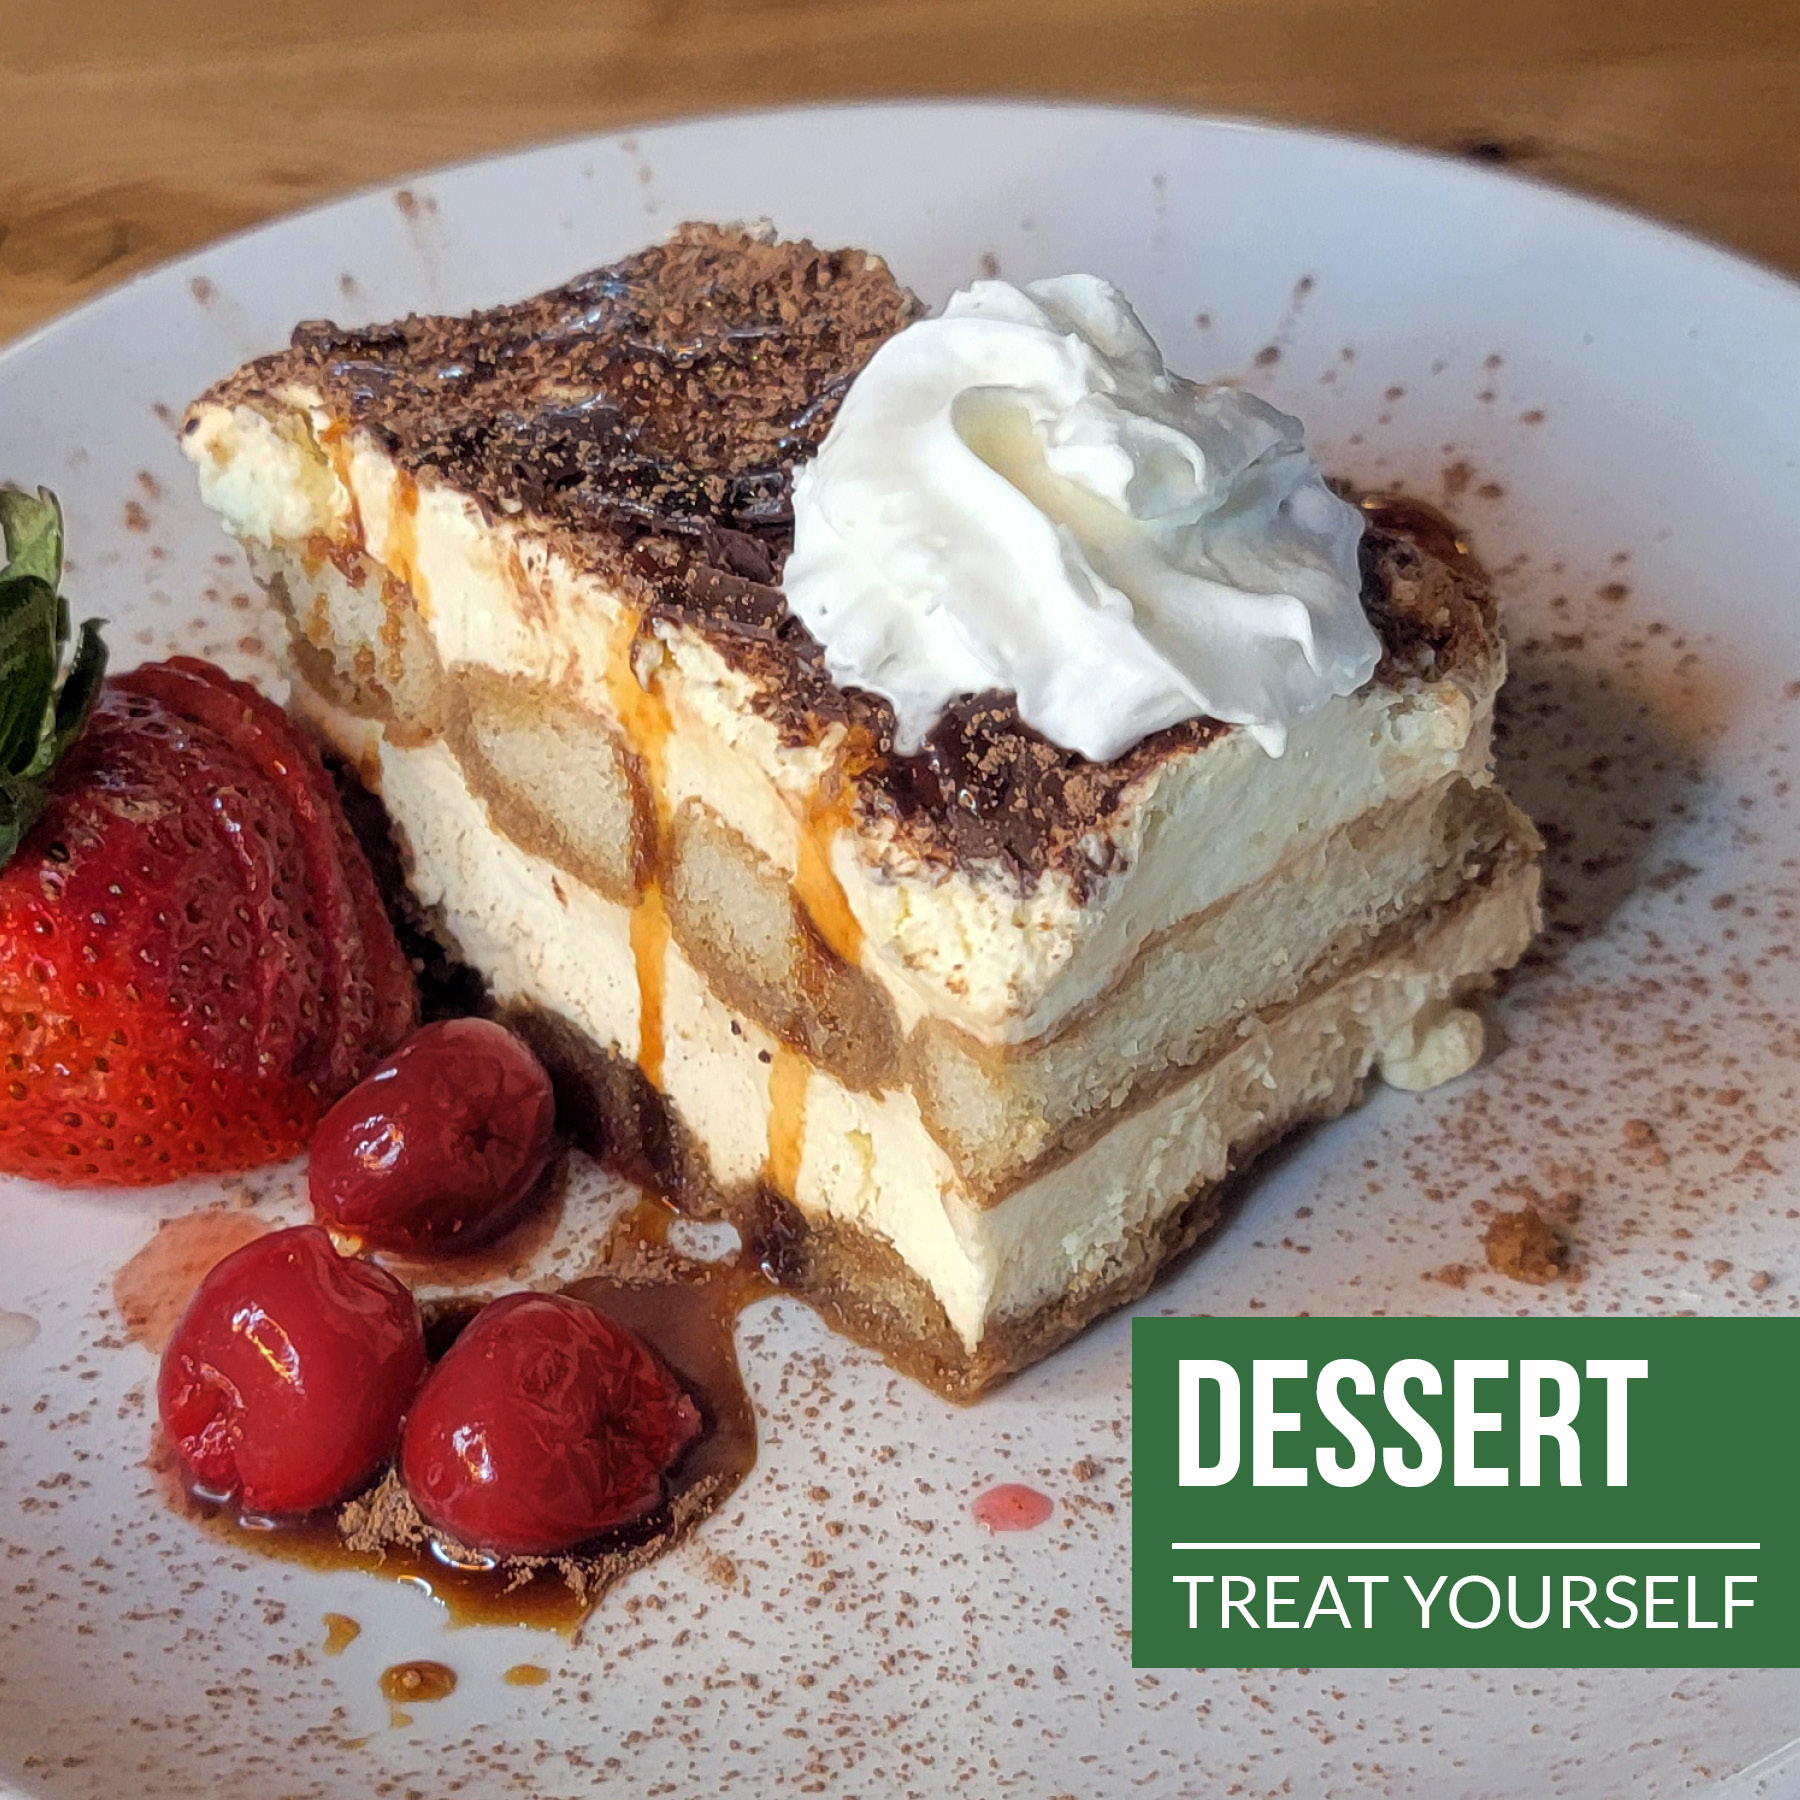 Tiramisu dusted with cocoa powder, topped with whipped cream, with a strawberry and cherries on the side